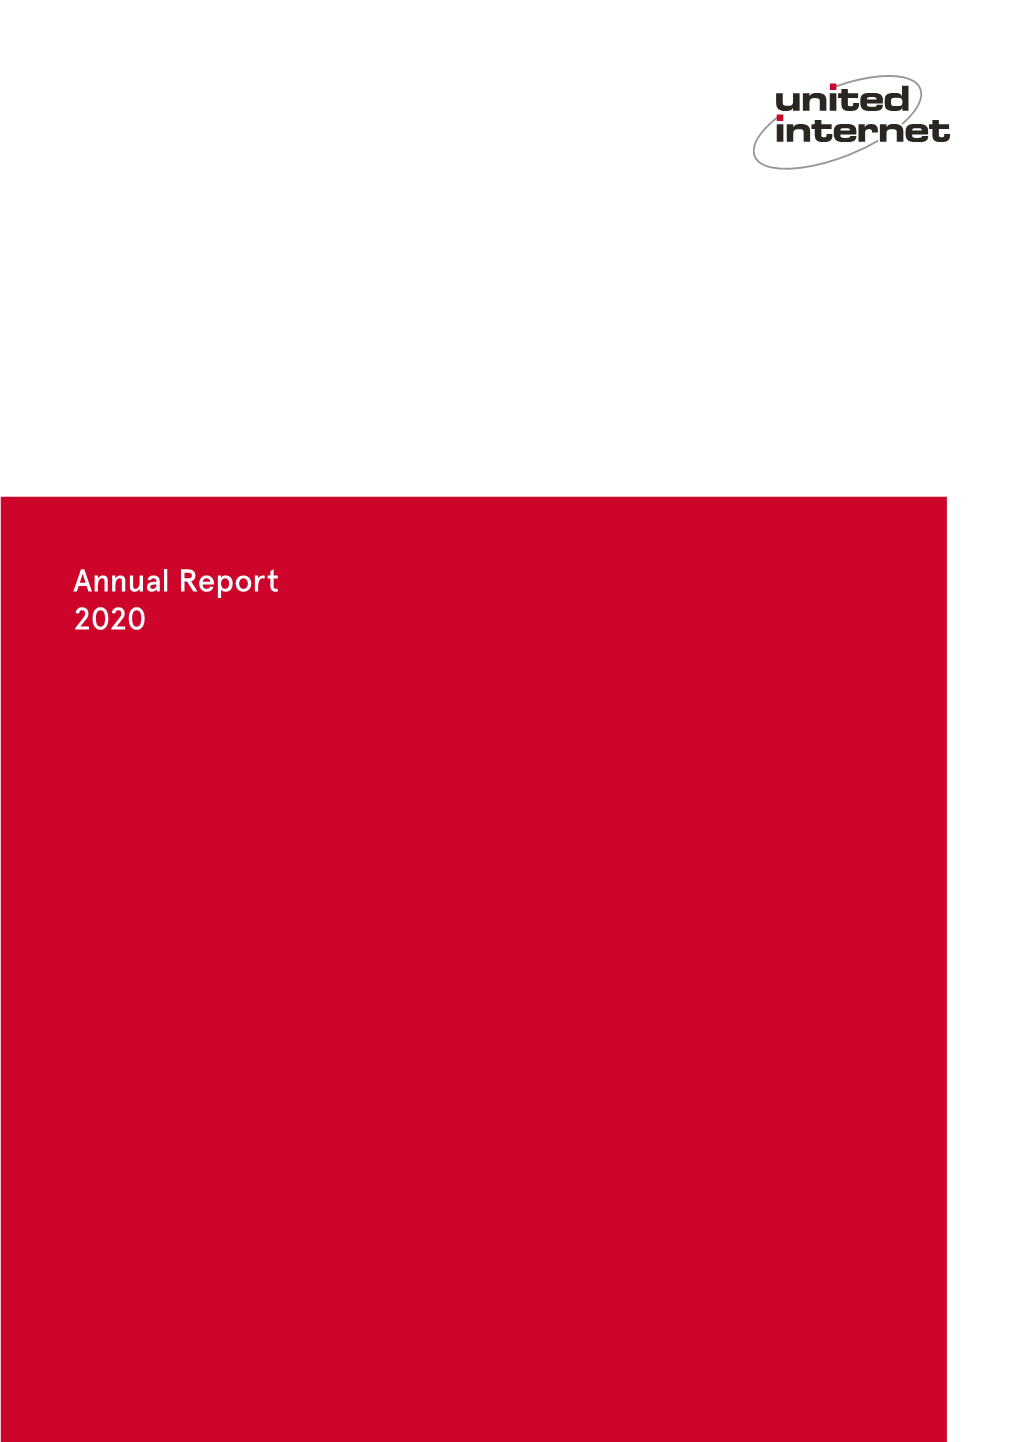 Annual Report 2020 SELECTED KEY FIGURES